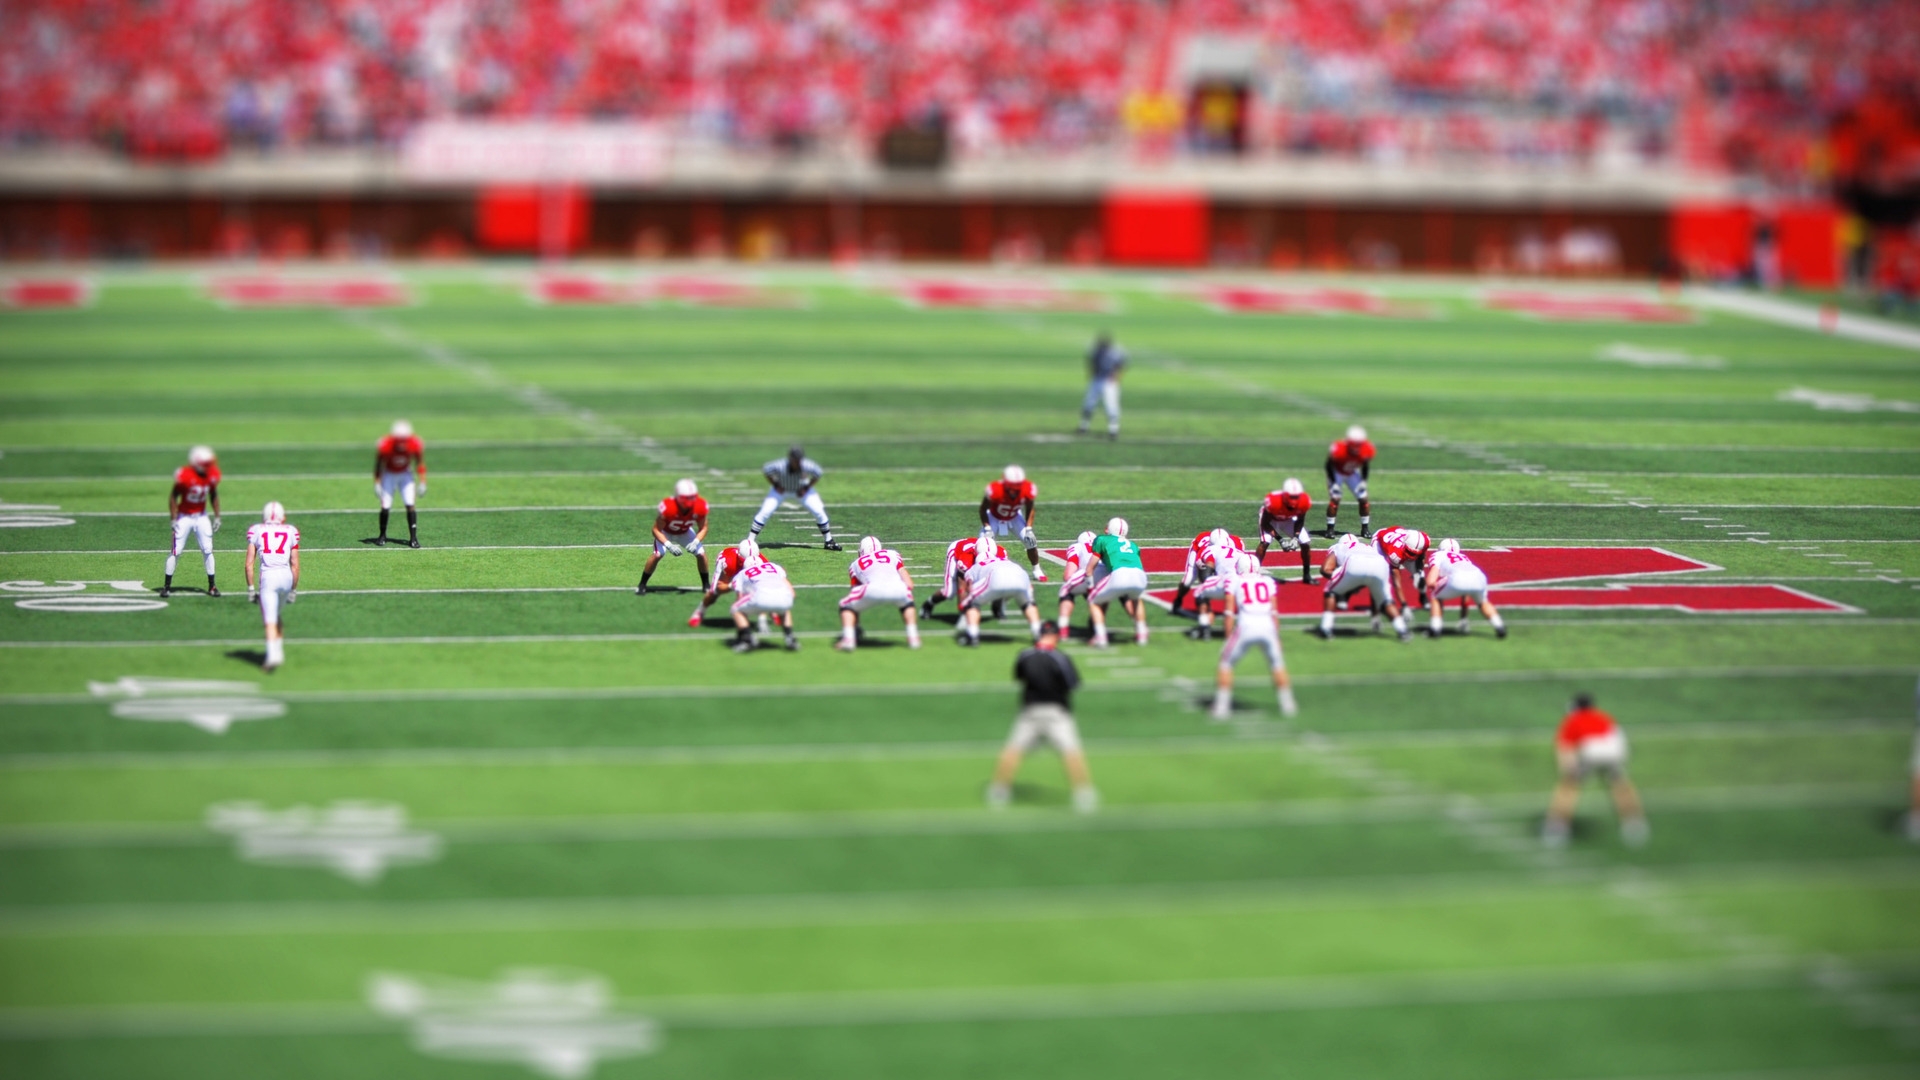 American Football Toy Effect for 1920 x 1080 HDTV 1080p resolution